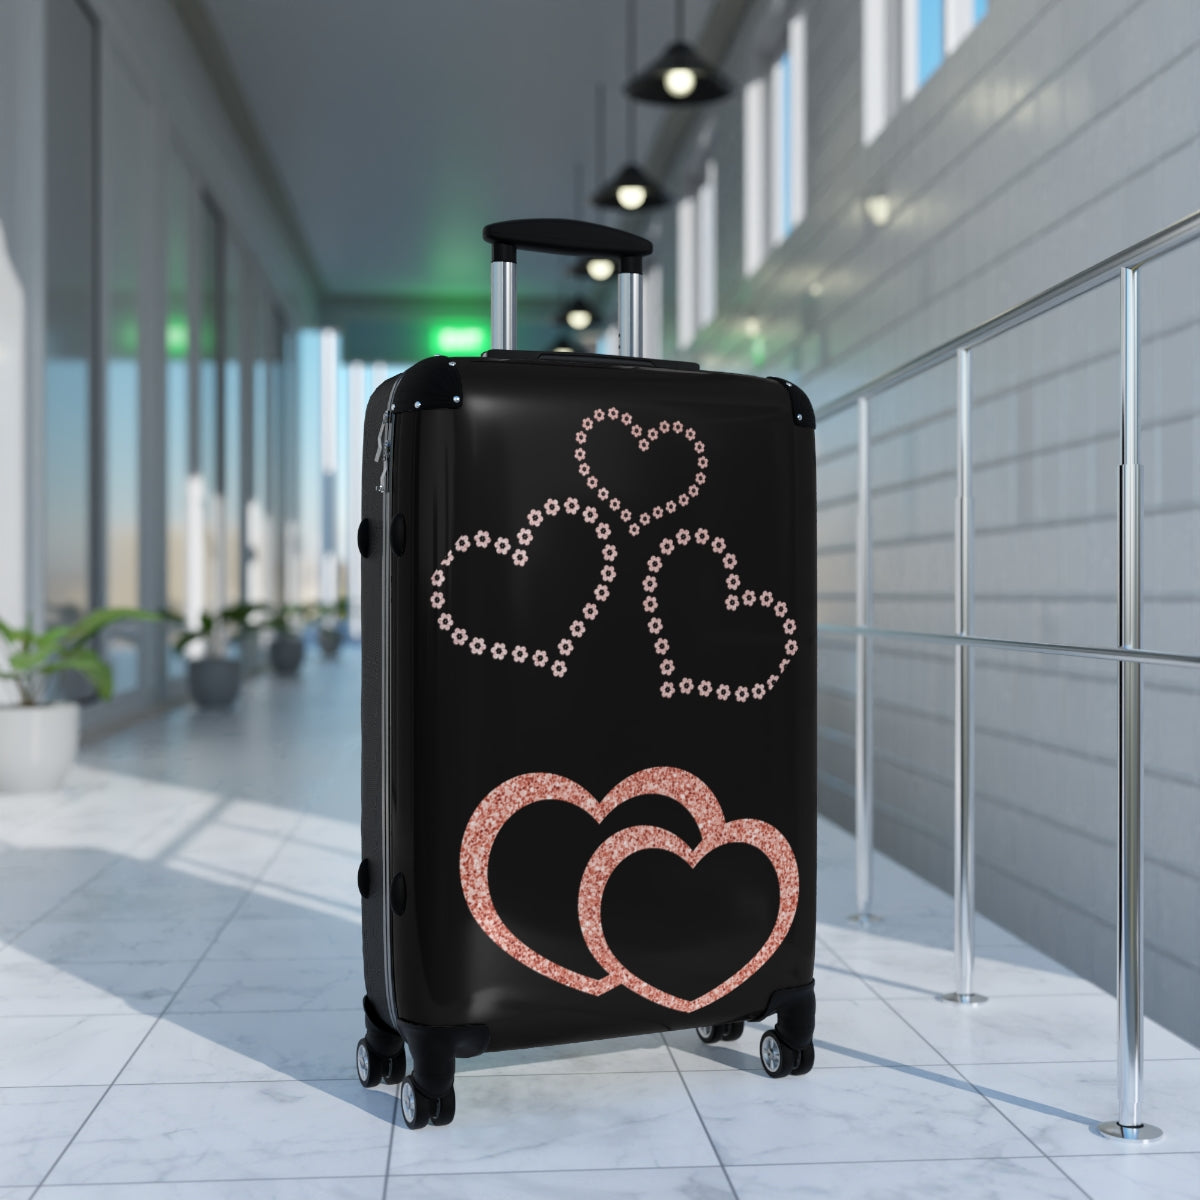 LUGGAGE WITH WHEELS, HEARTS ART SPARKLE SUITCASE SET BY ARTZIRA, VALENTINE DAY GIFT, HONEYMOON TRAVEL LUGGAGEs Double Wheeled Spinners, Women's Choice